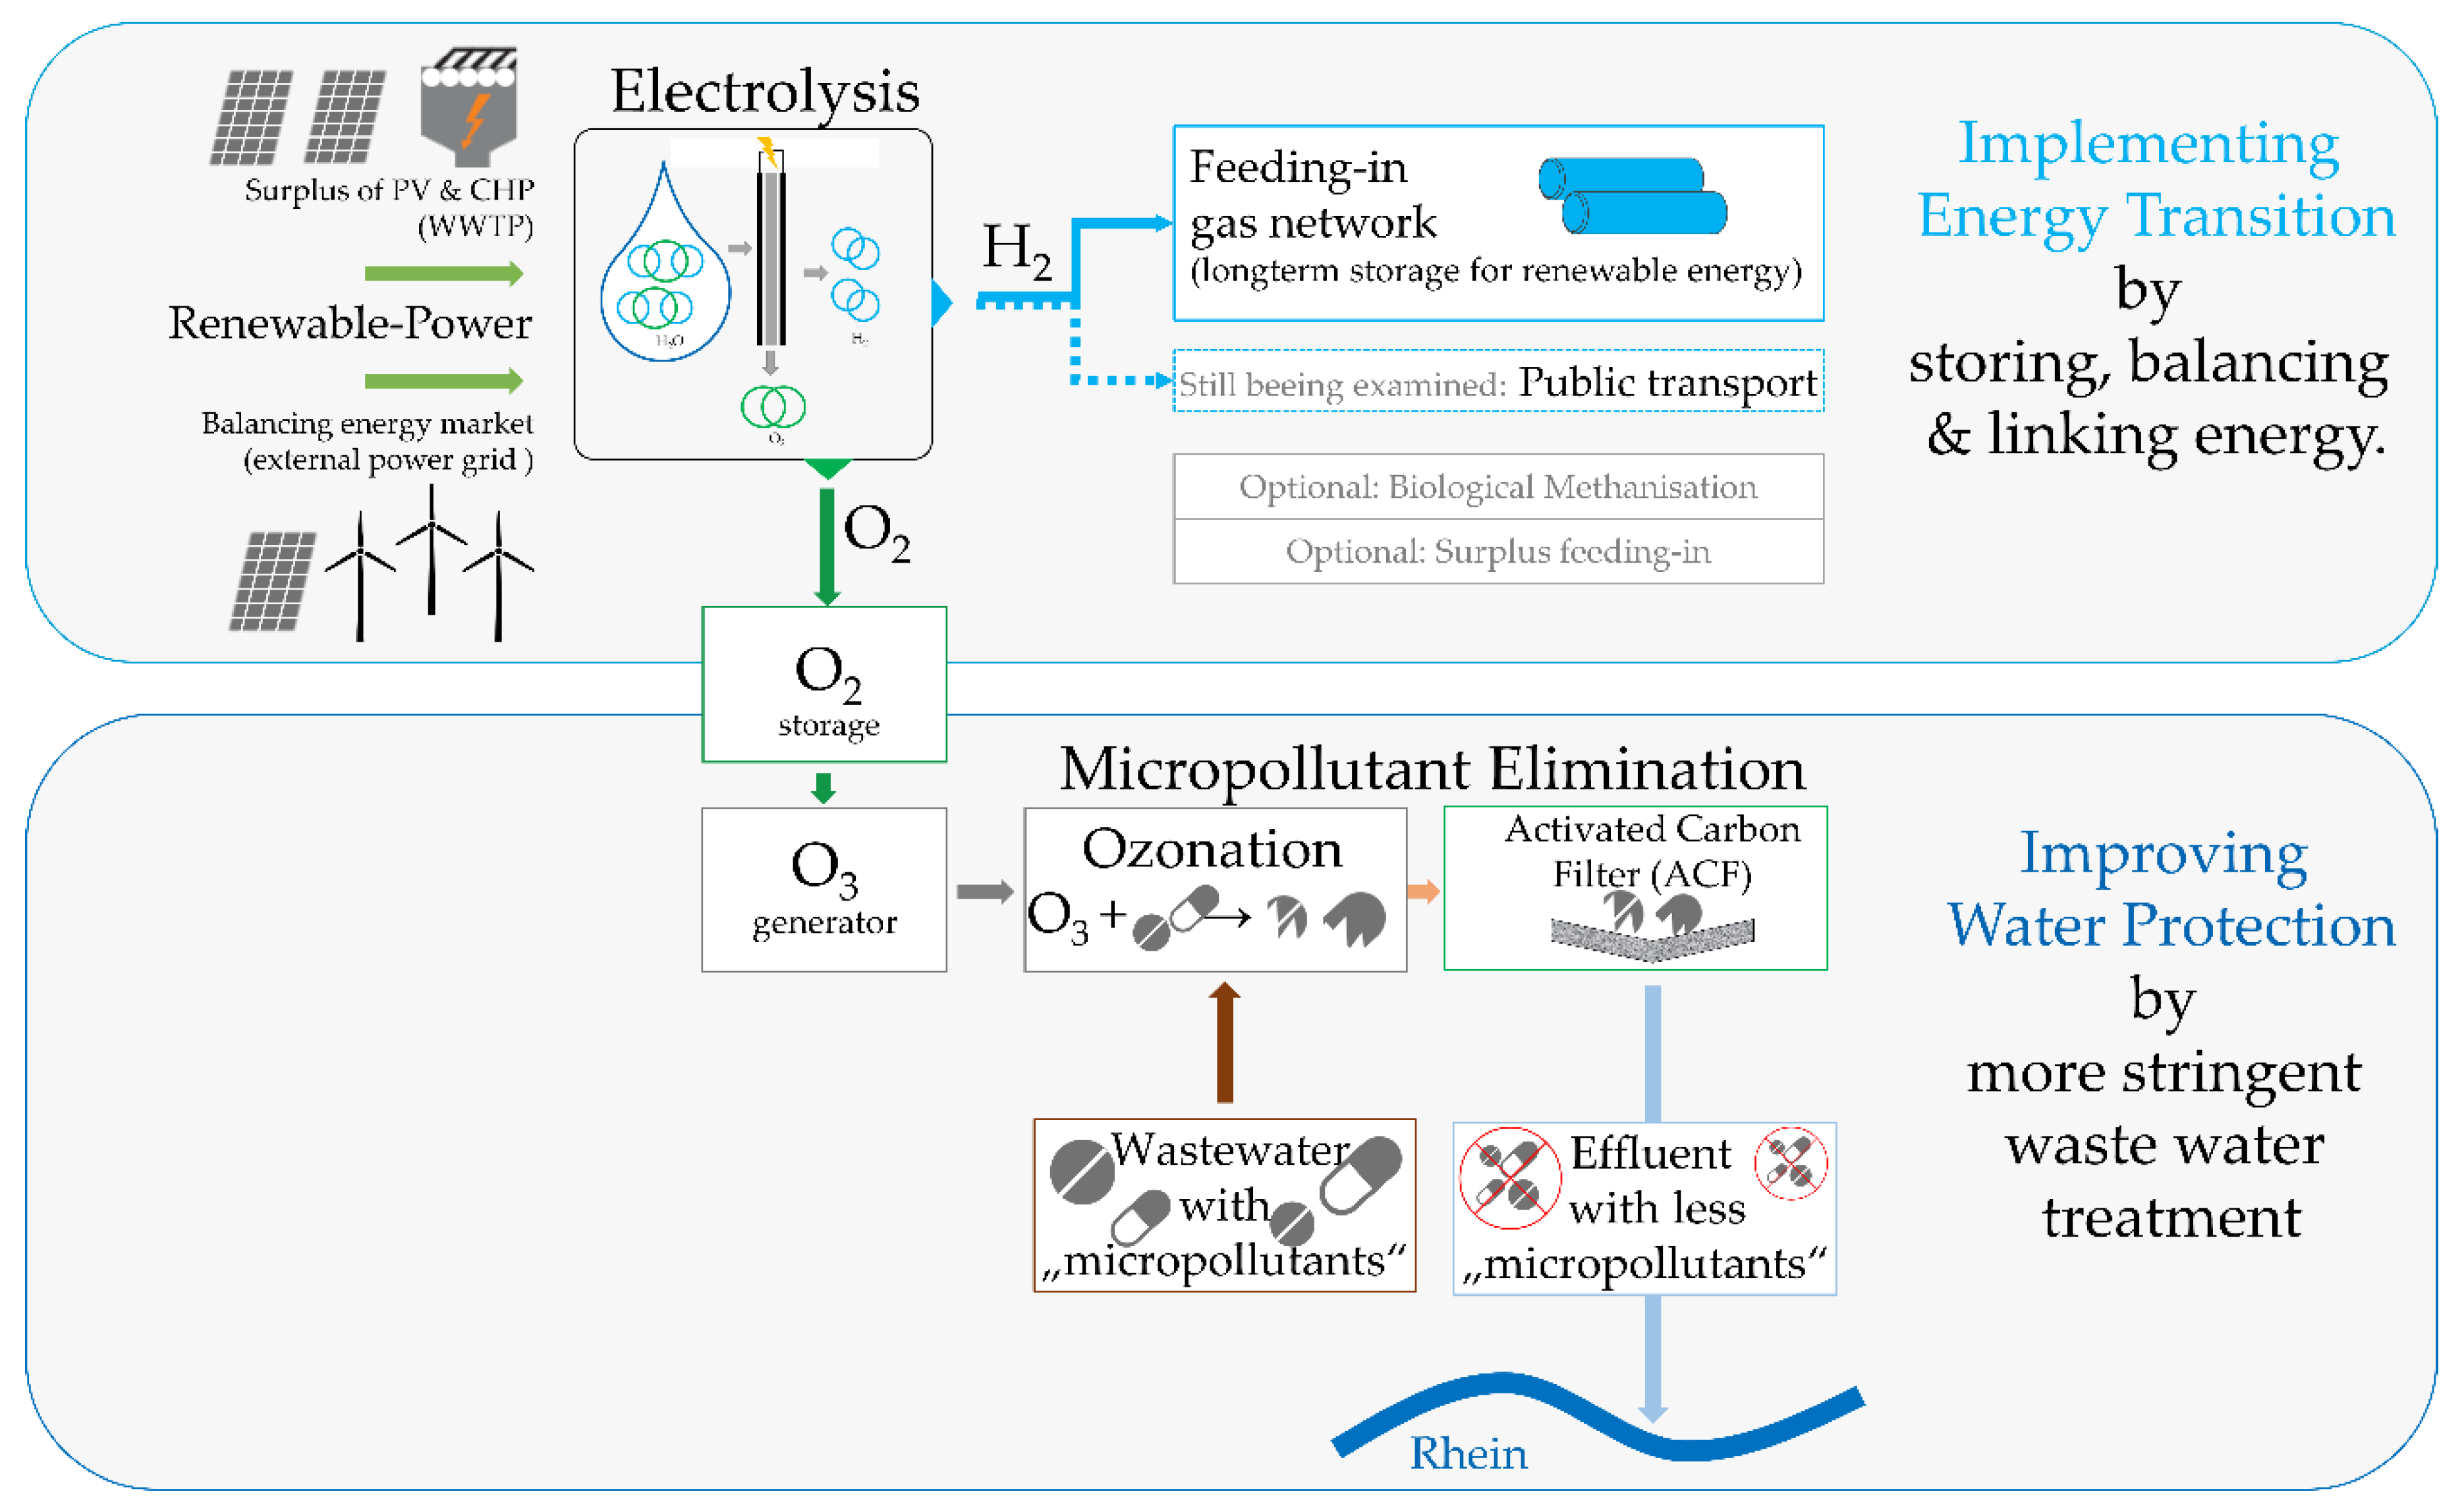 Energies Free Full Text Advanced Wastewater Treatment To Eliminate Organic Micropollutants In Wastewater Treatment Plants In Combination With Energy Efficient Electrolysis At Wwtp Mainz Html